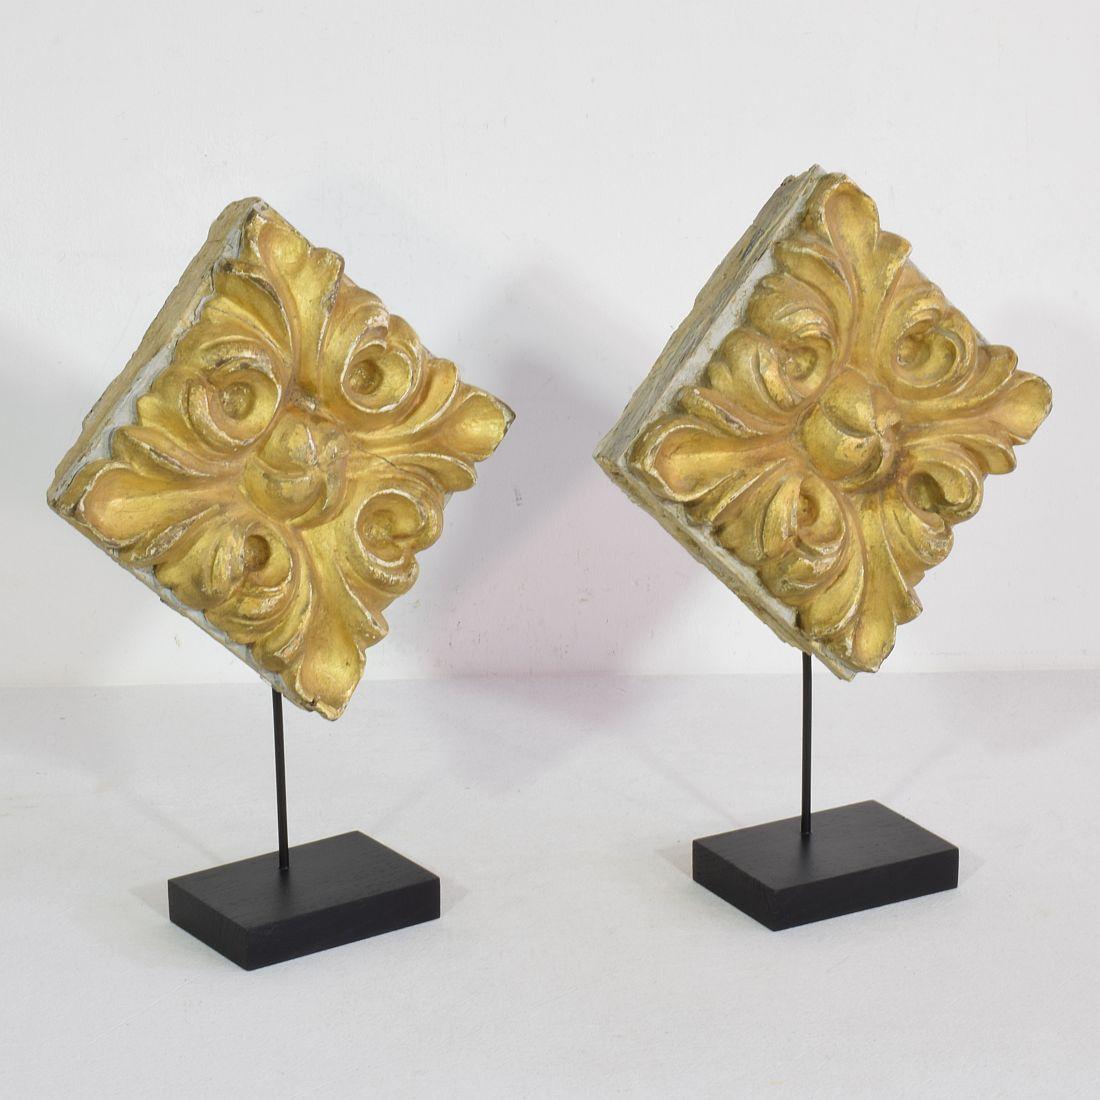 Hand-Carved Pair 18th Century Portuguese Neoclassical Giltwood Floral Ornaments